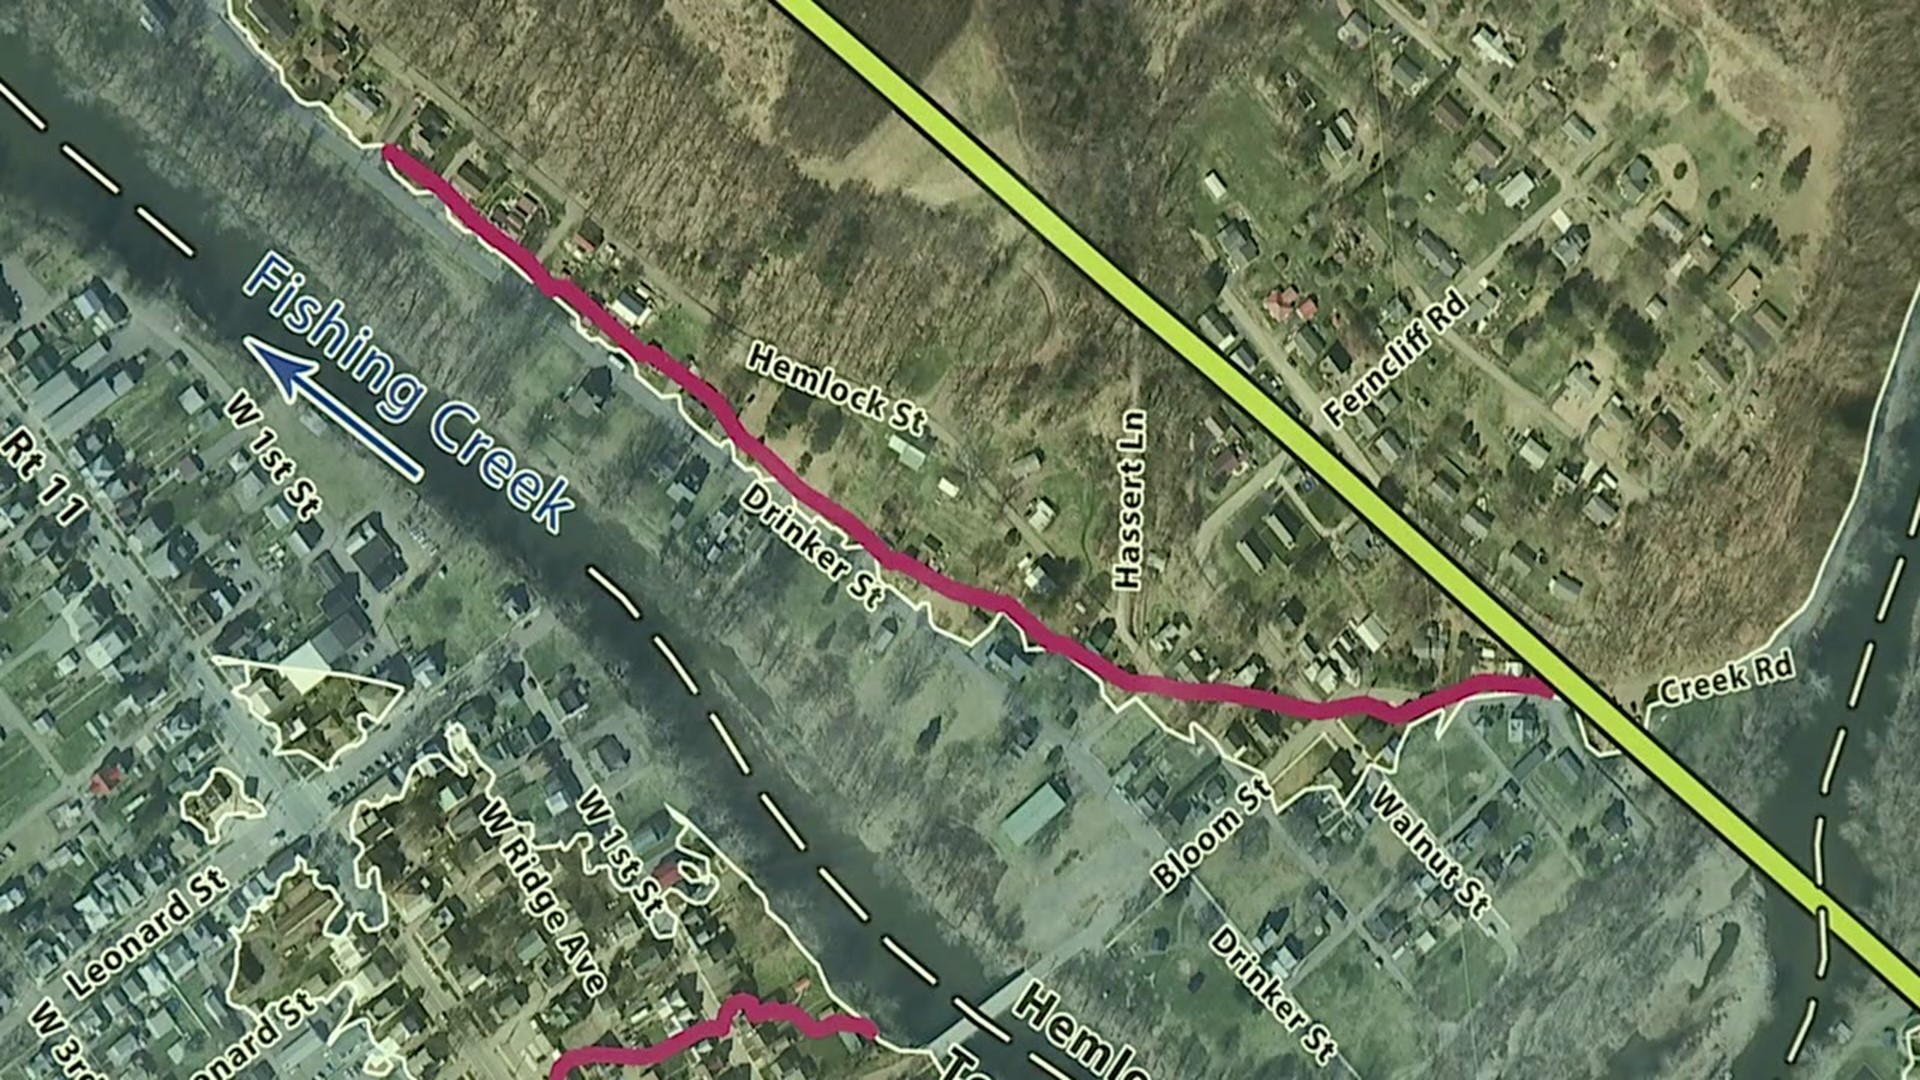 Columbia County hired engineerings to conduct a study on the Fishing Creek Floodplain, hoping to pinpoint ways to make improvements.